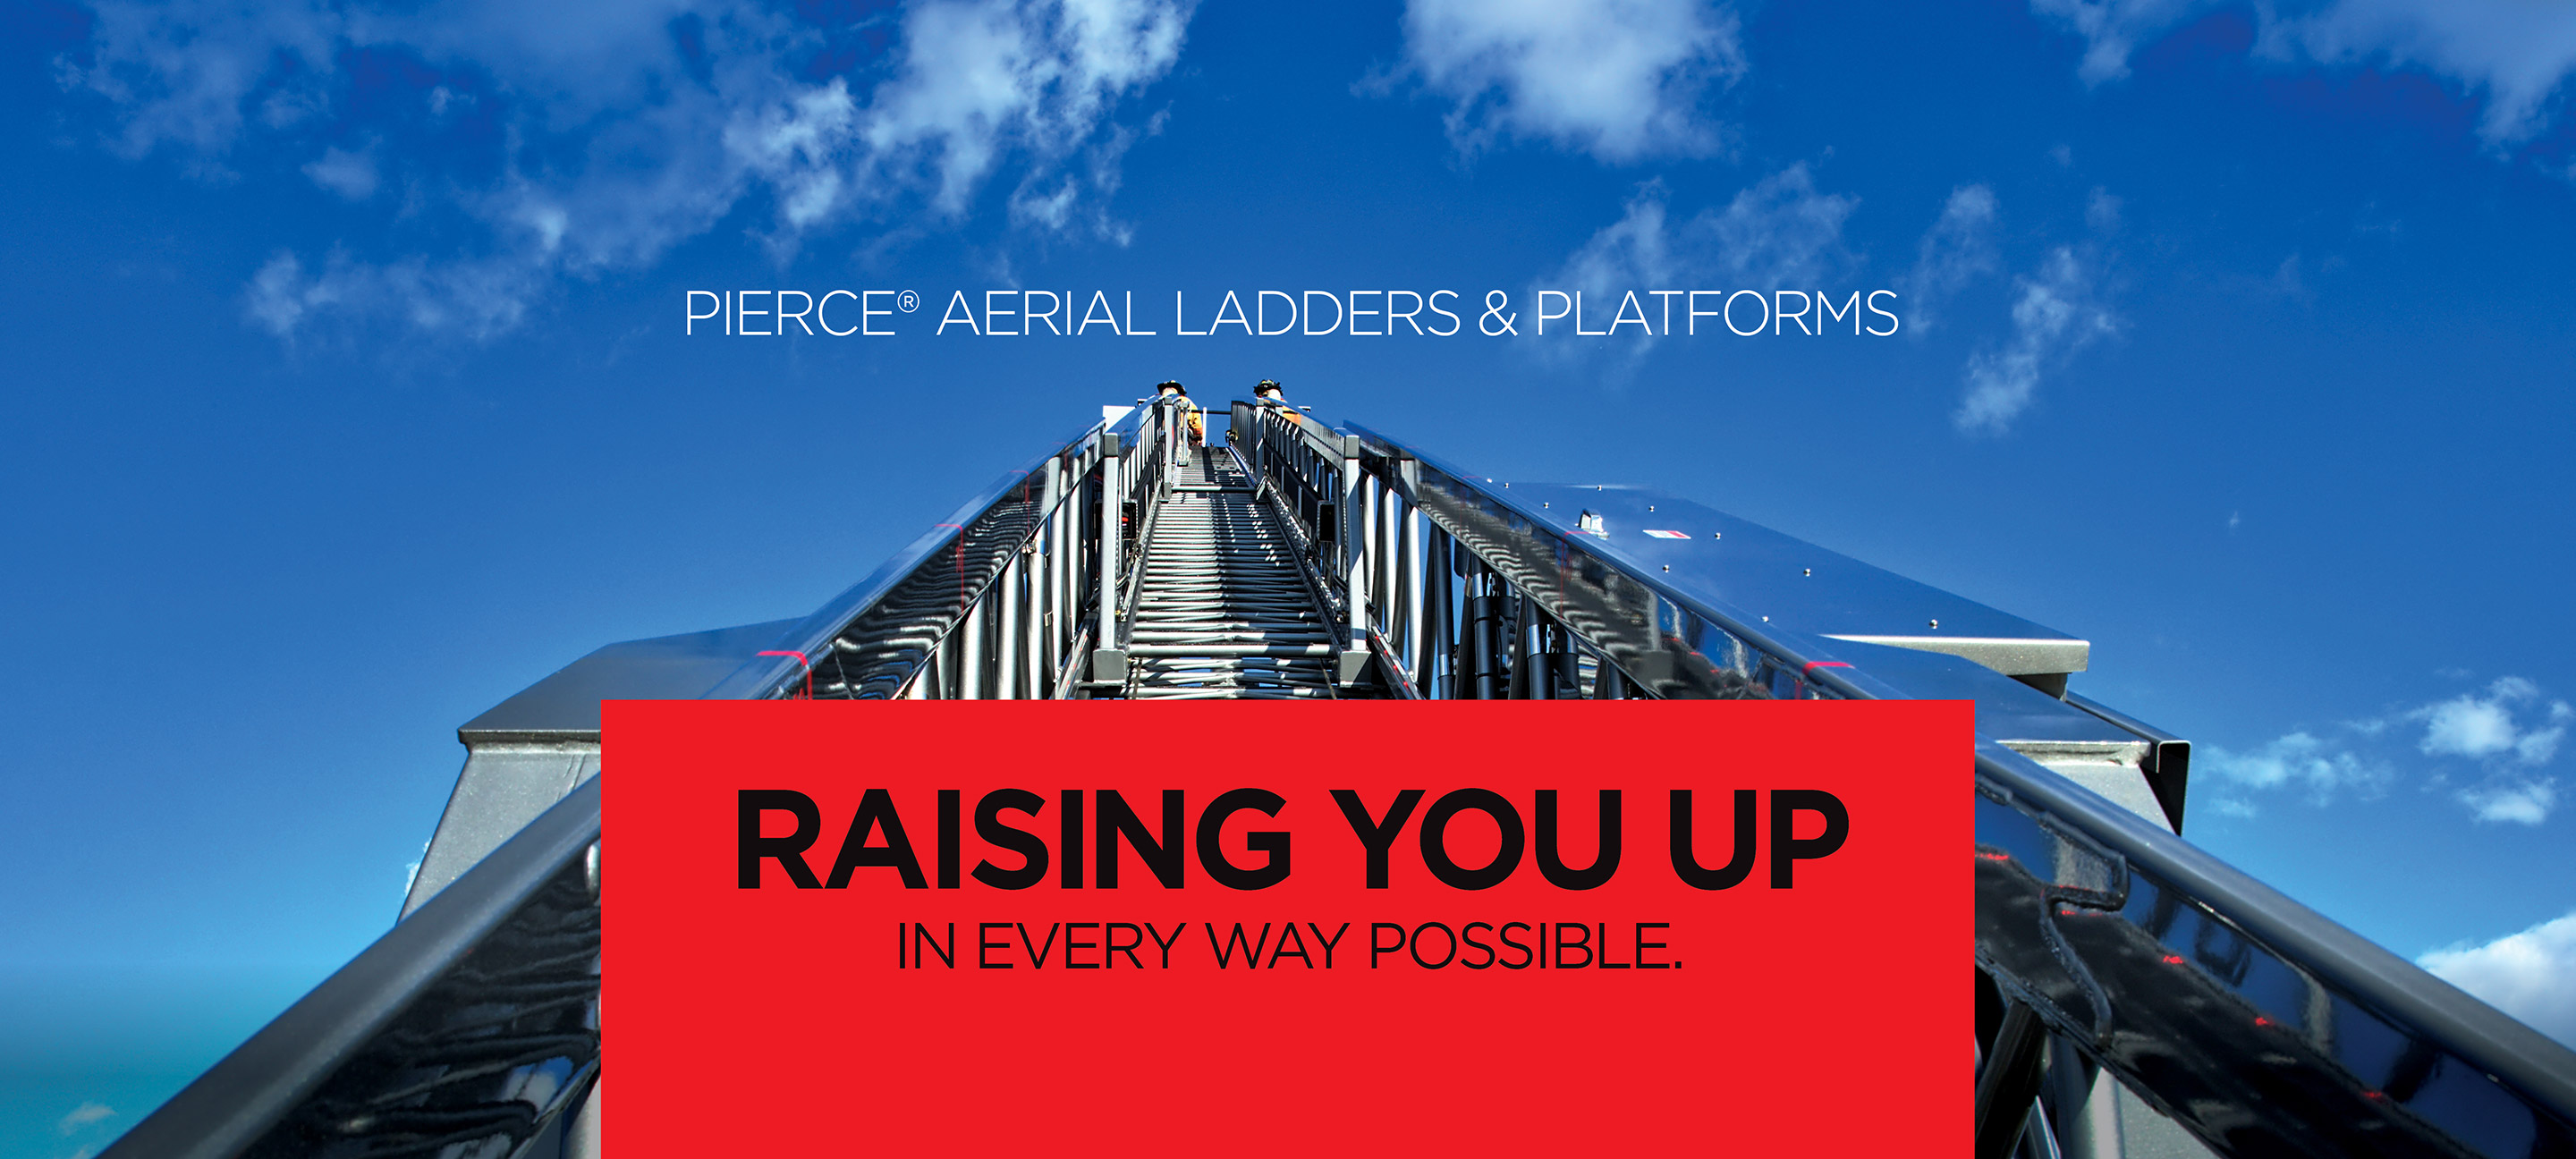 Pierce® Aerial Ladders & Platforms - Raising You Up In Every Way Possible